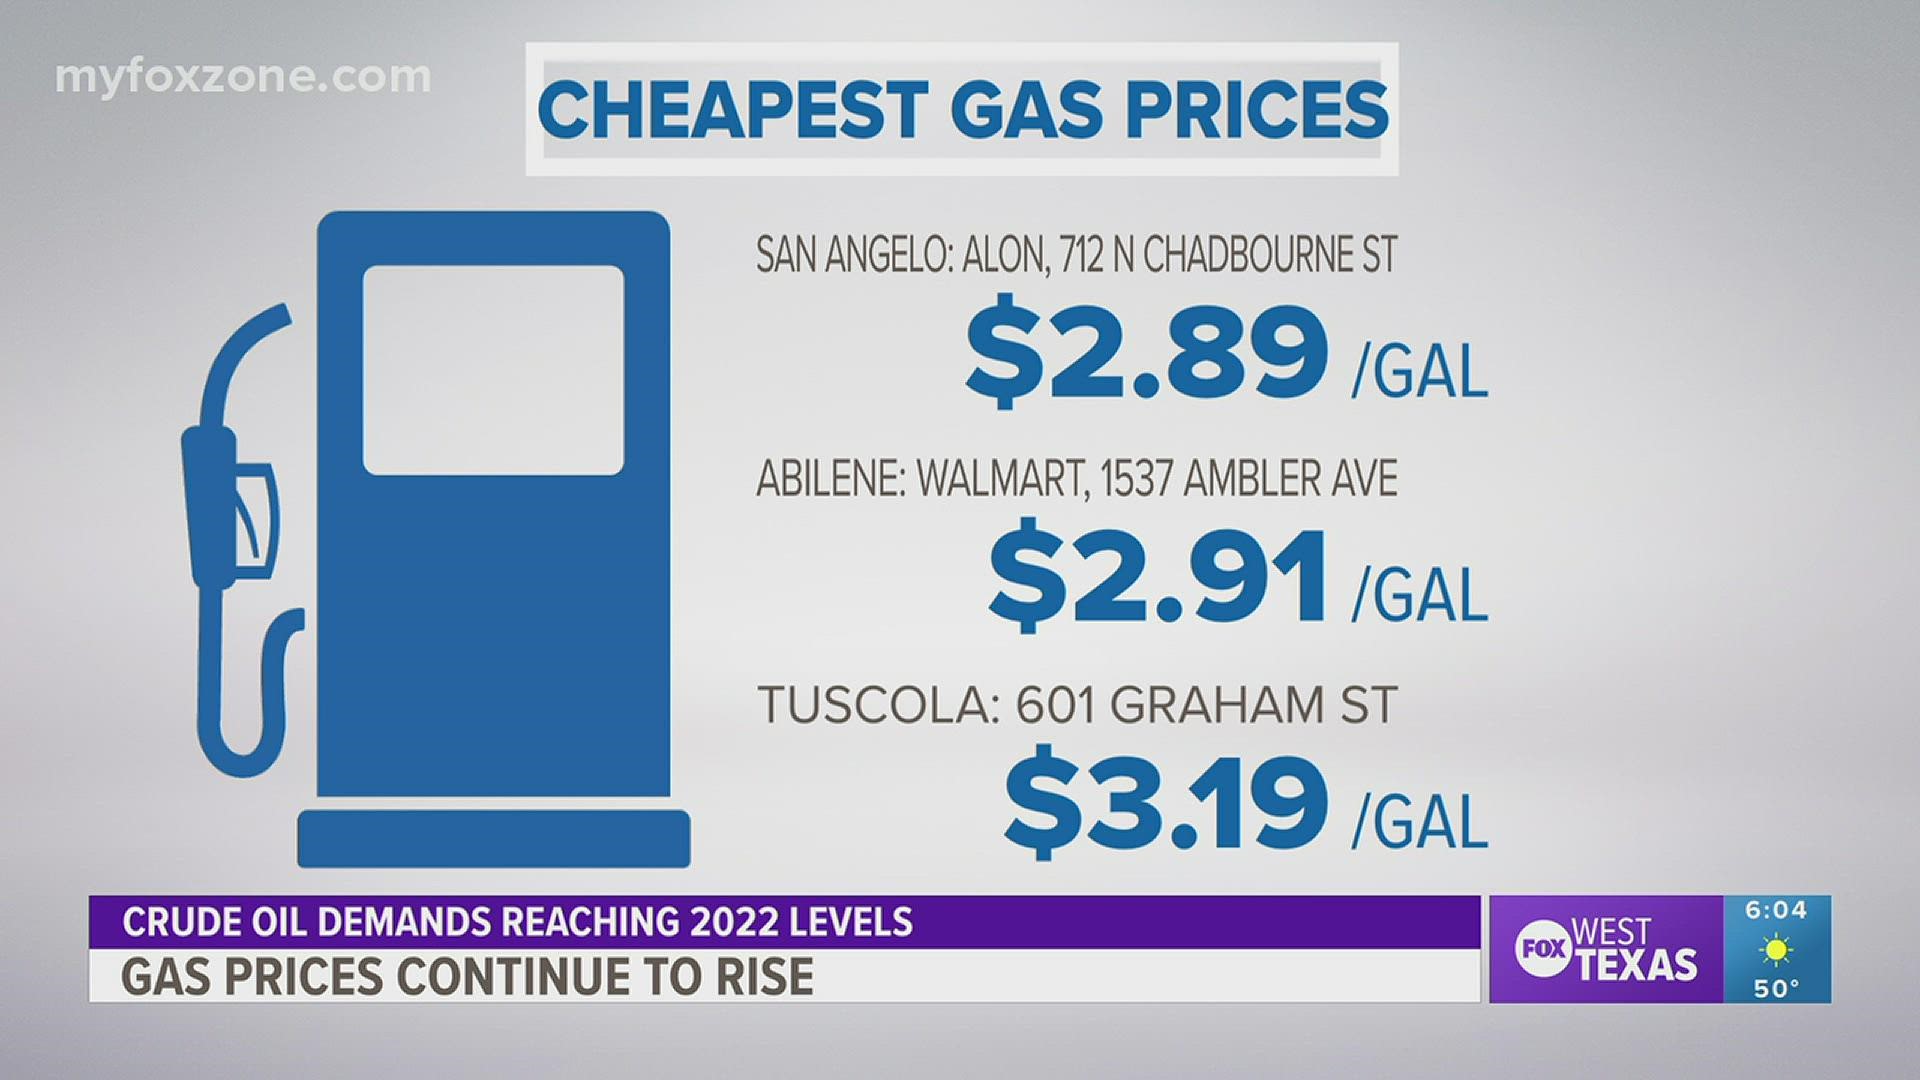 Here in West Texas, we have experienced an uptick in price at the pump. Here are some keys to saving your fuel and what the trends say about our future prices.